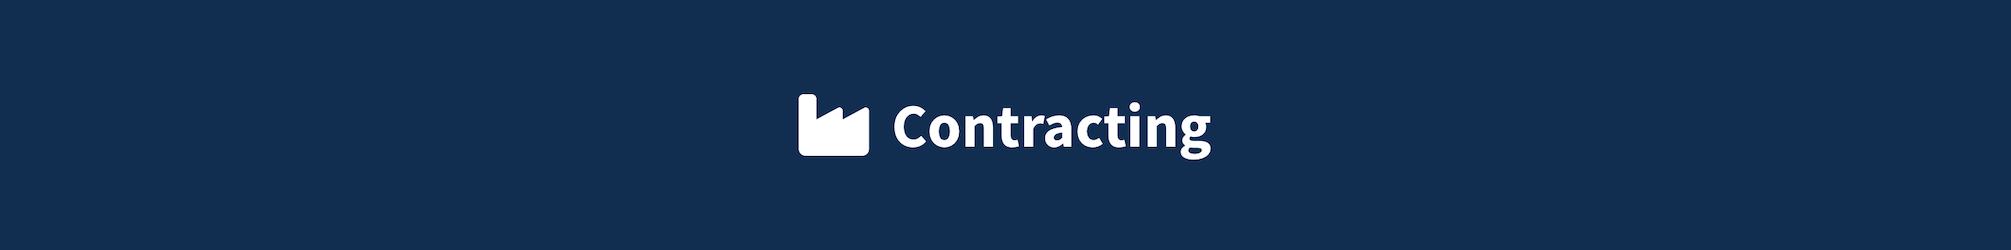 Acquisitions and contracting